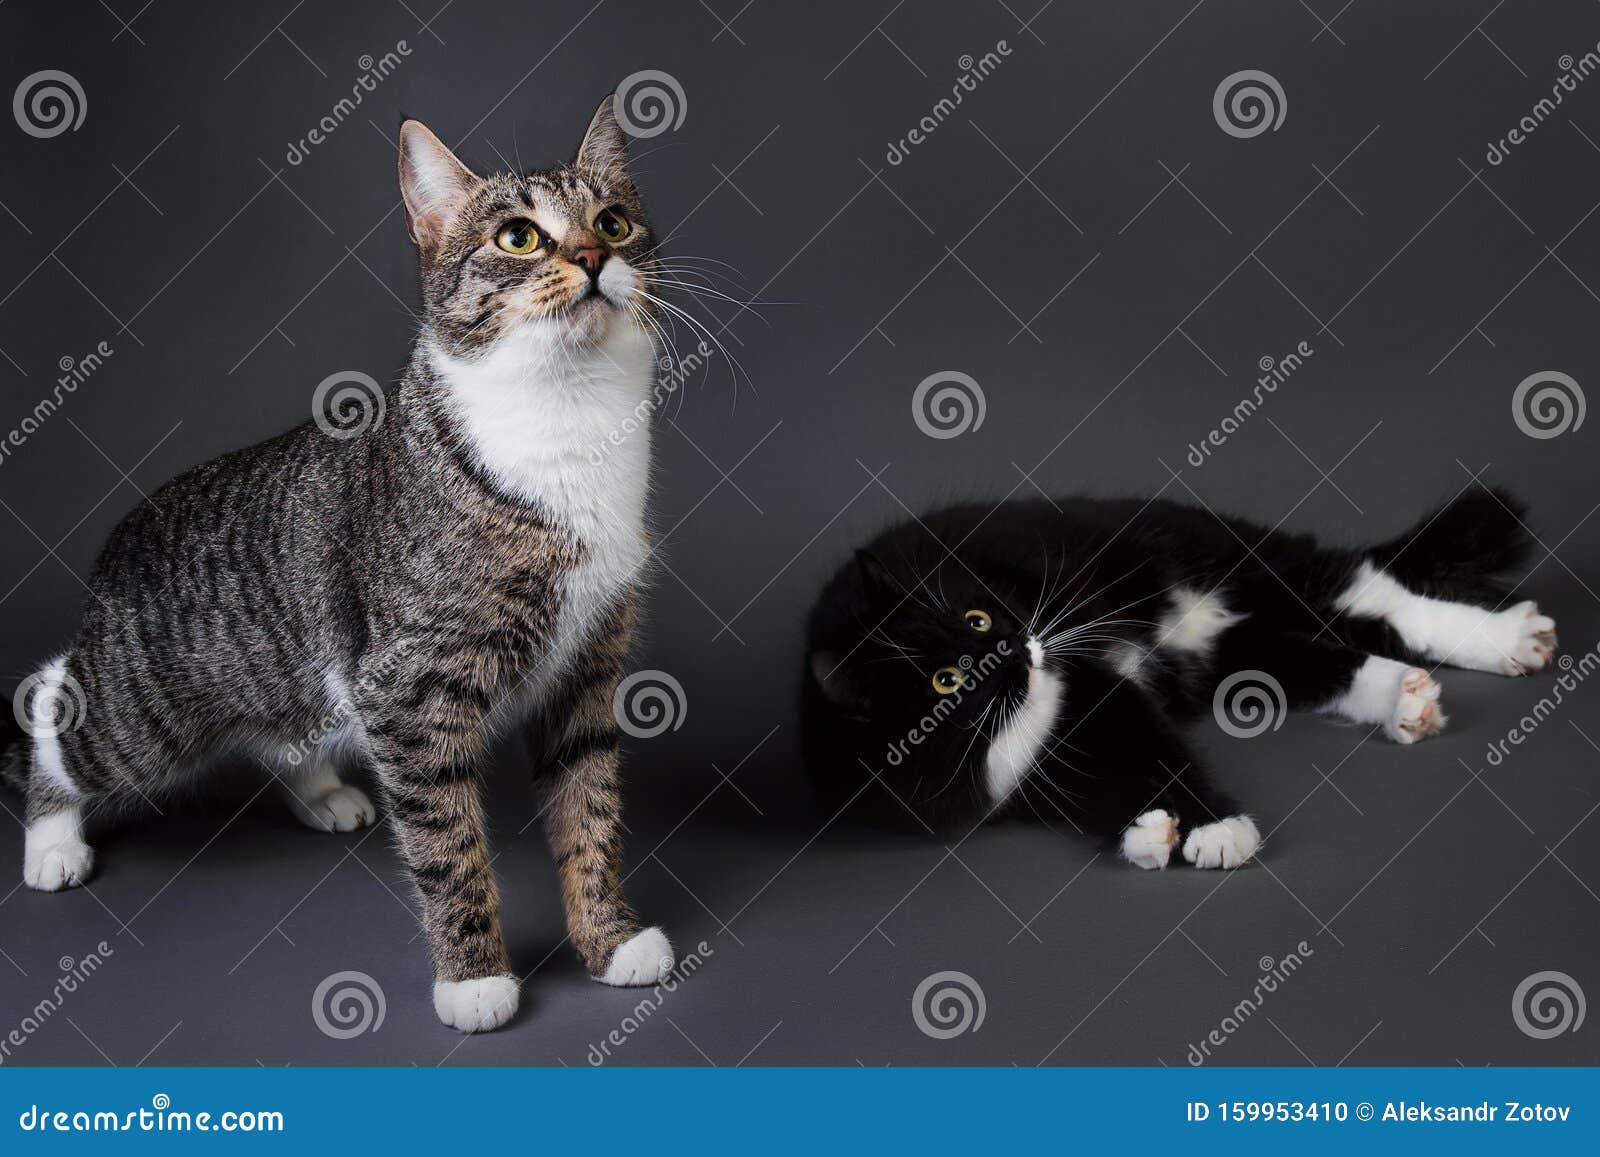 portrait of two cute kittens a black kitten and gray stripped on grey background in studio